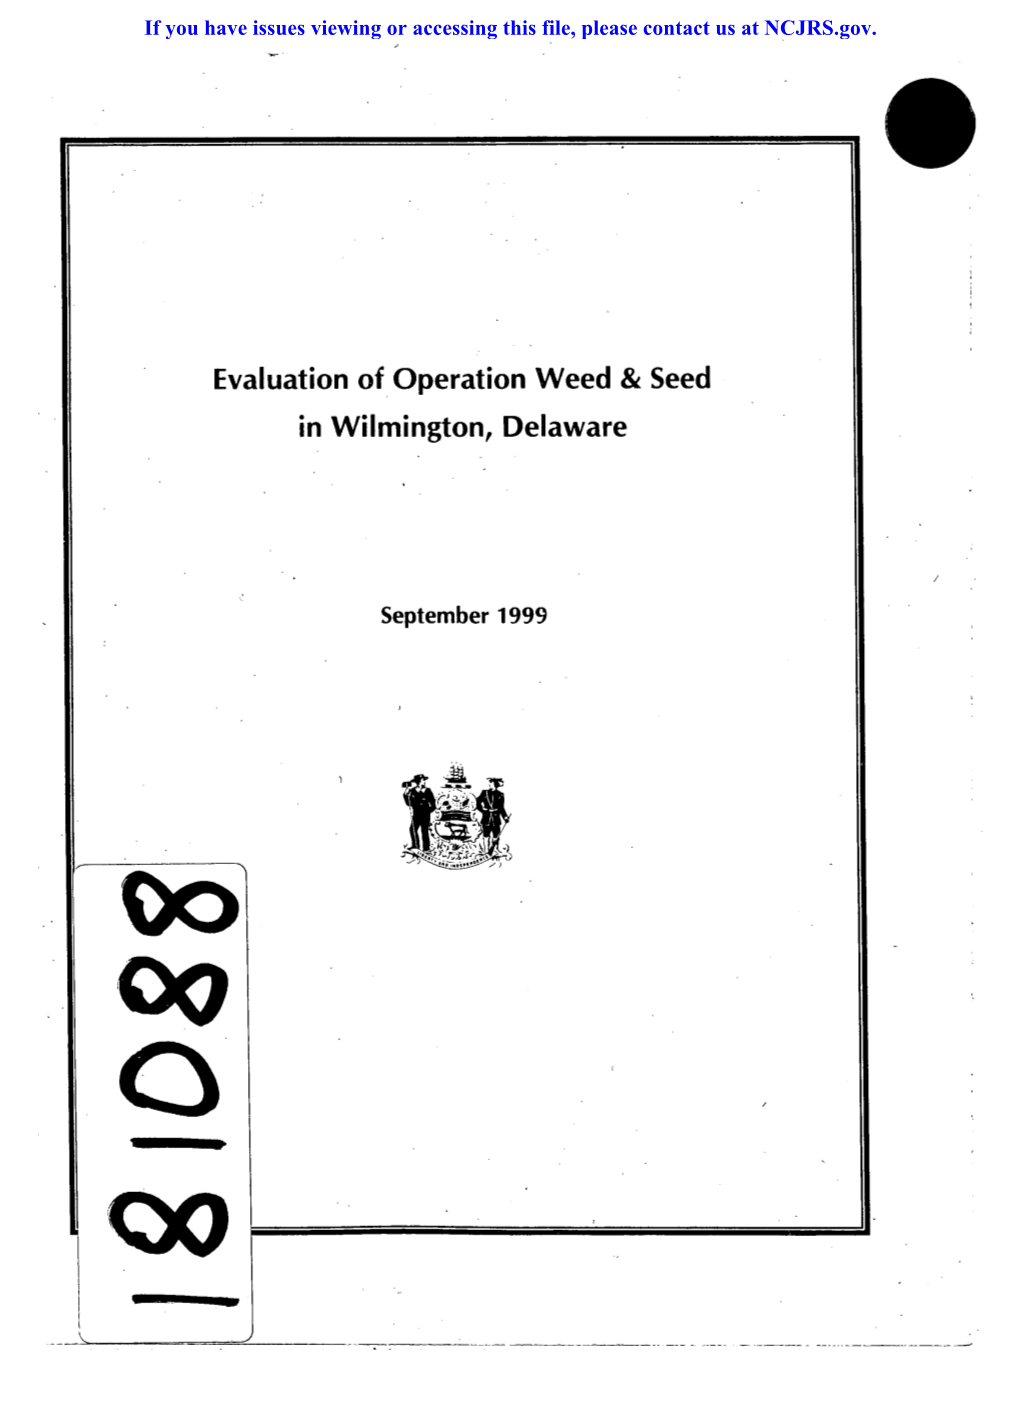 Evaluation of Operation Weed & Seed in Wilmington, Delaware